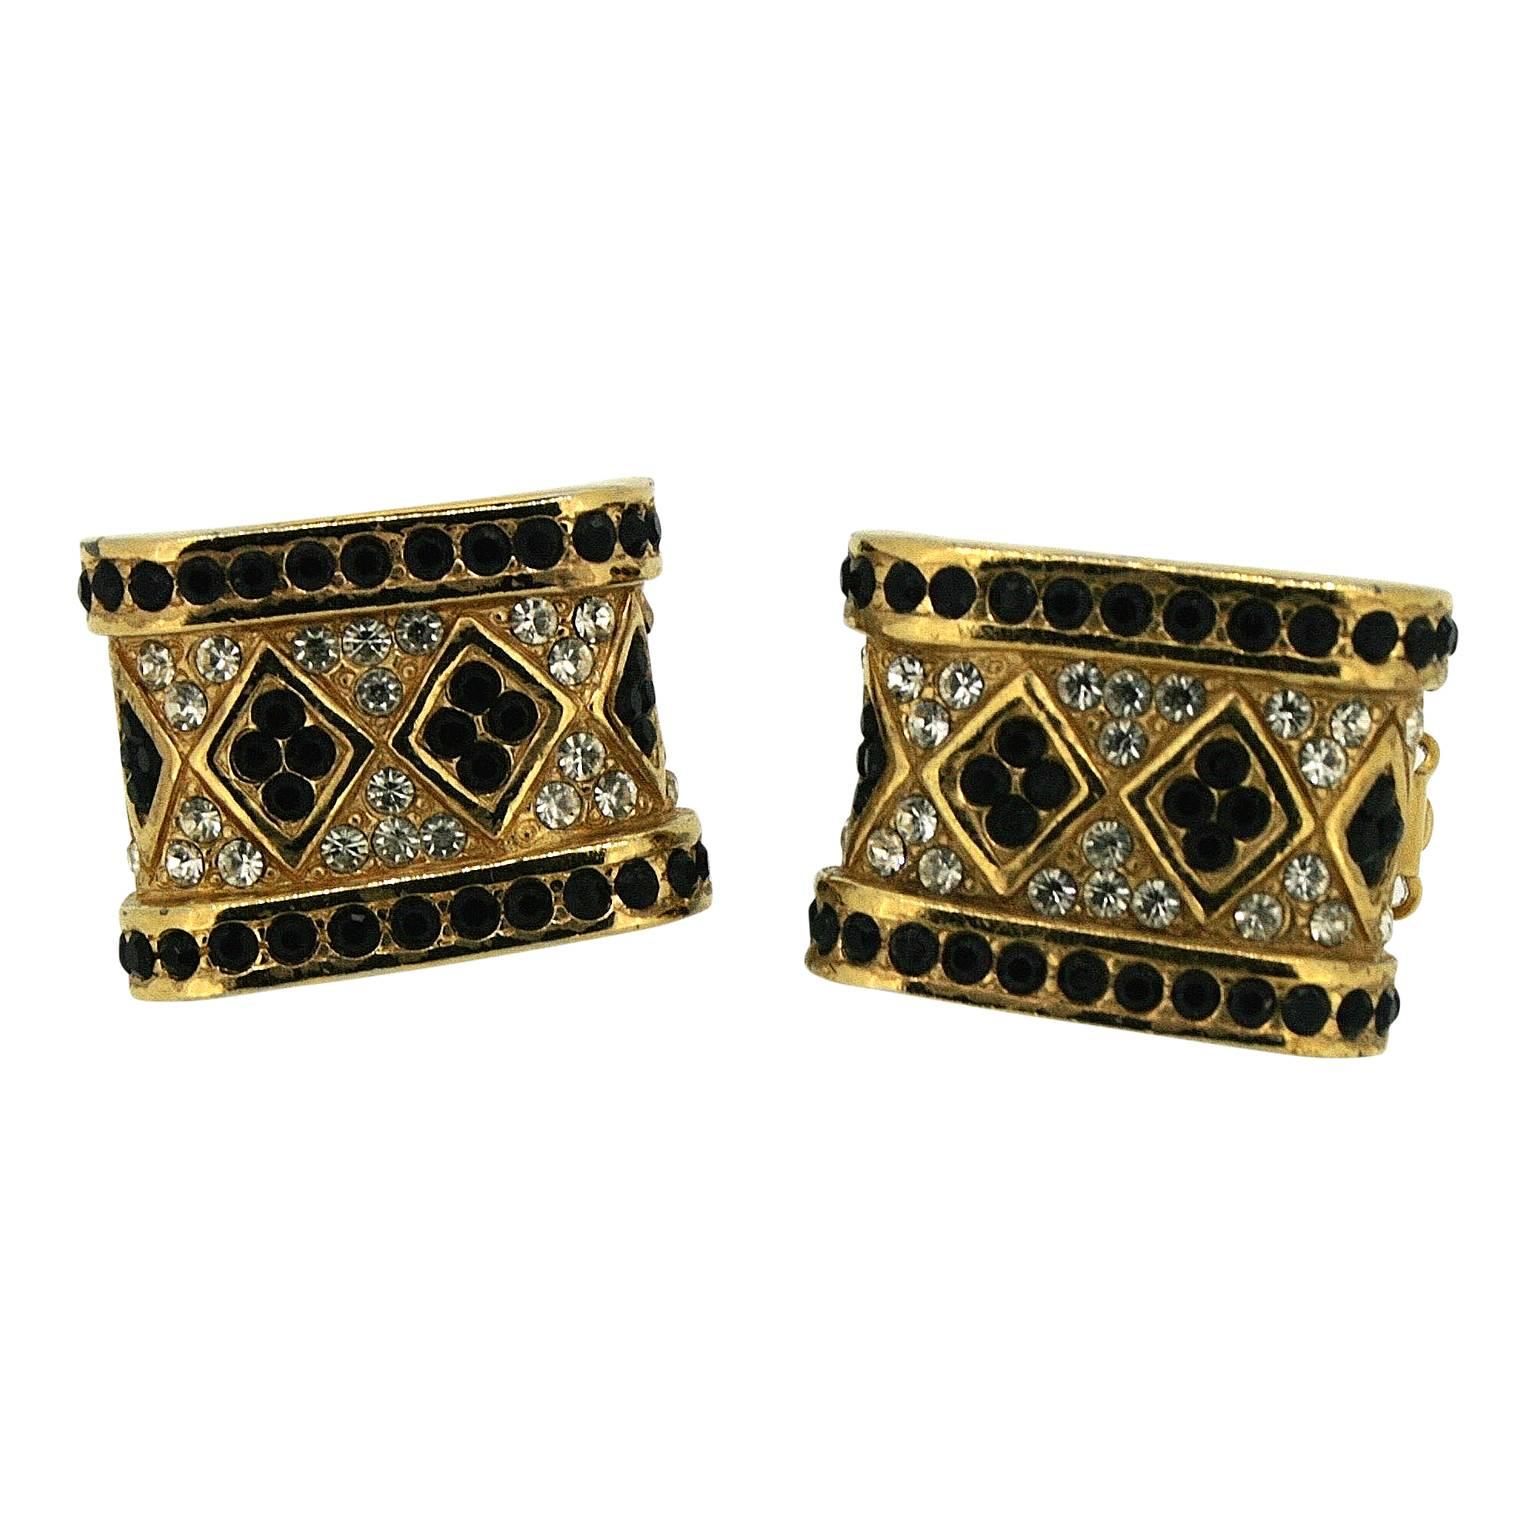 Featuring deep black rhinestones, these earrings date from the 1970s and were made by Ciner.
Condition Report:
Excellent
The Details...
These gold tone rectangular panel earrings feature a pattern comprised of small, round black and clear